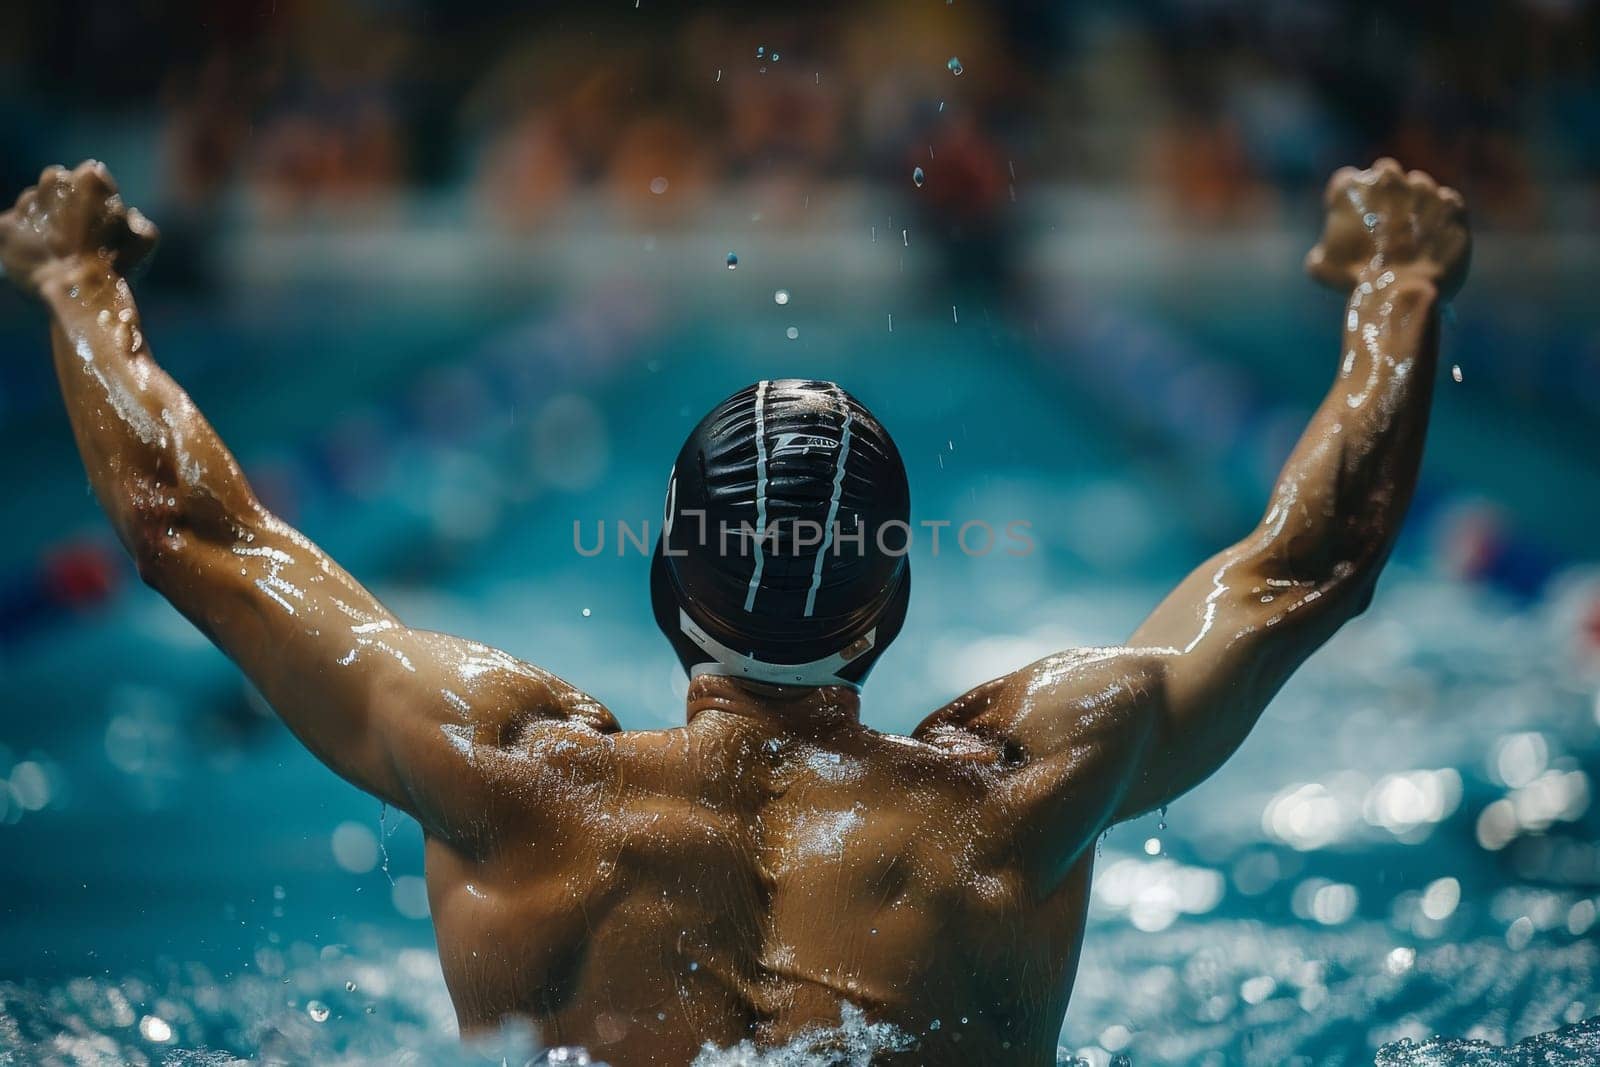 A man is swimming in a pool and is celebrating his victory. The water is blue and the man is wearing a white cap